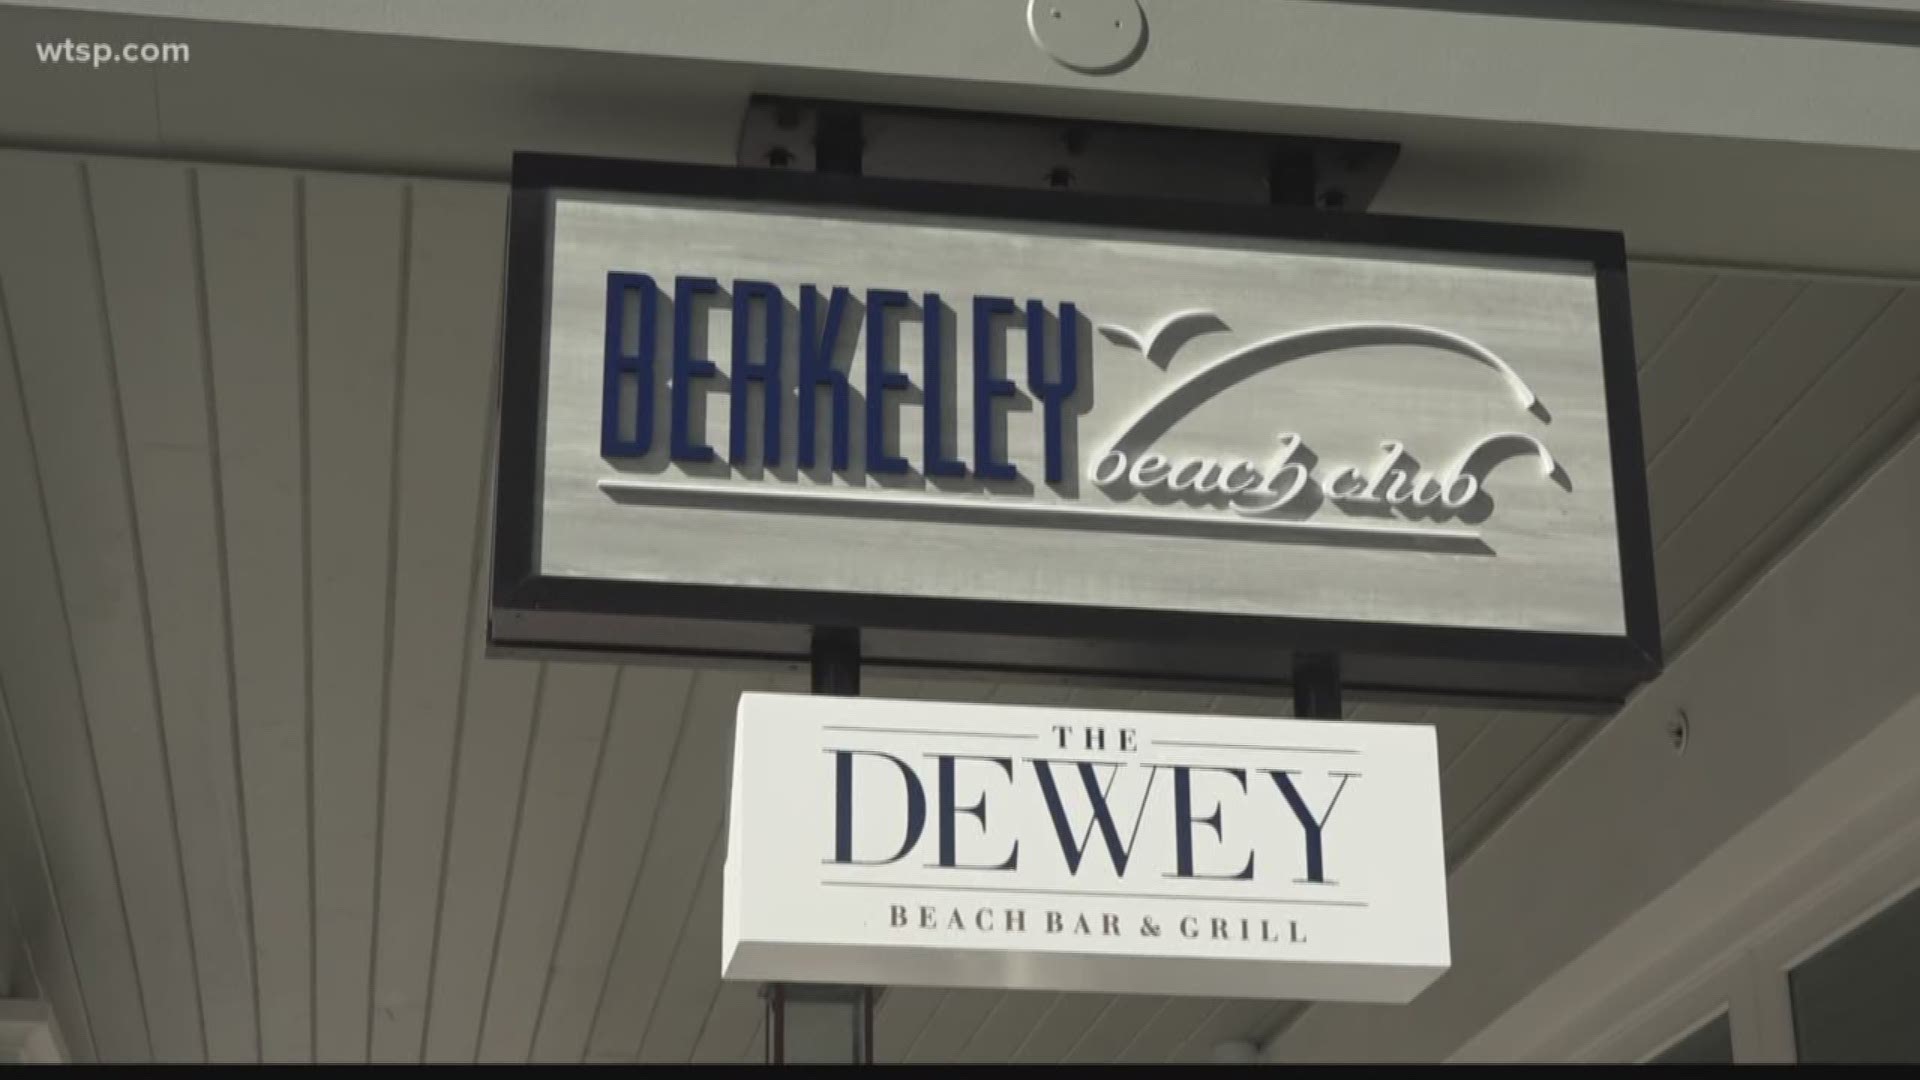 A look at the Berkeley Beach Club and the Dewey Beach Bar and Grill in Pass-a-Grille.